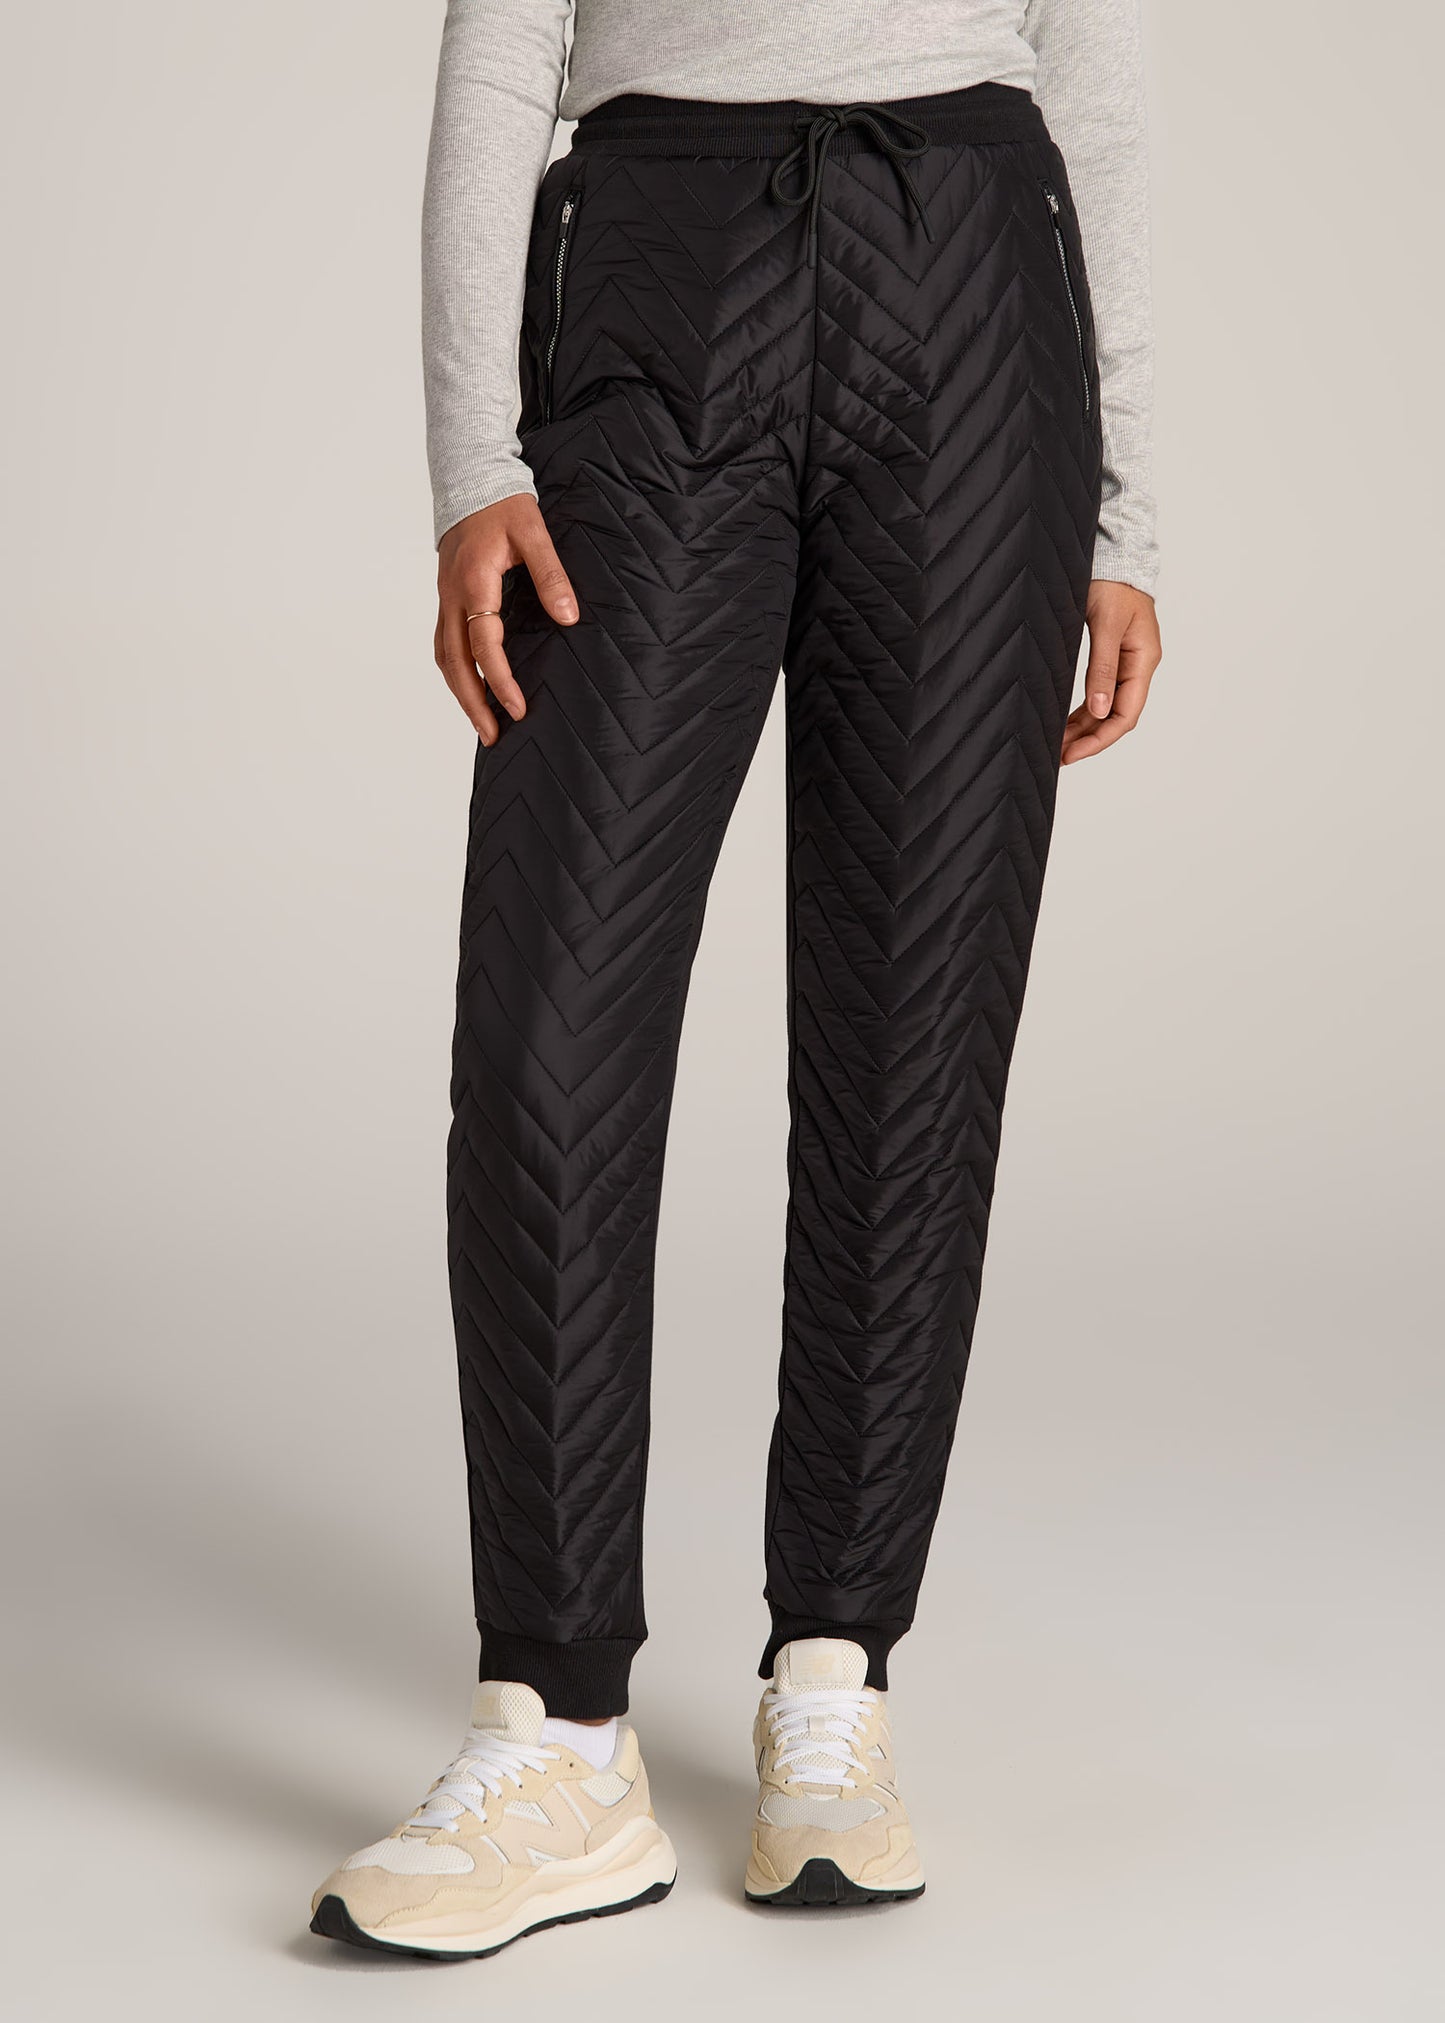 Top Picks for Women's Tall Joggers (2023)